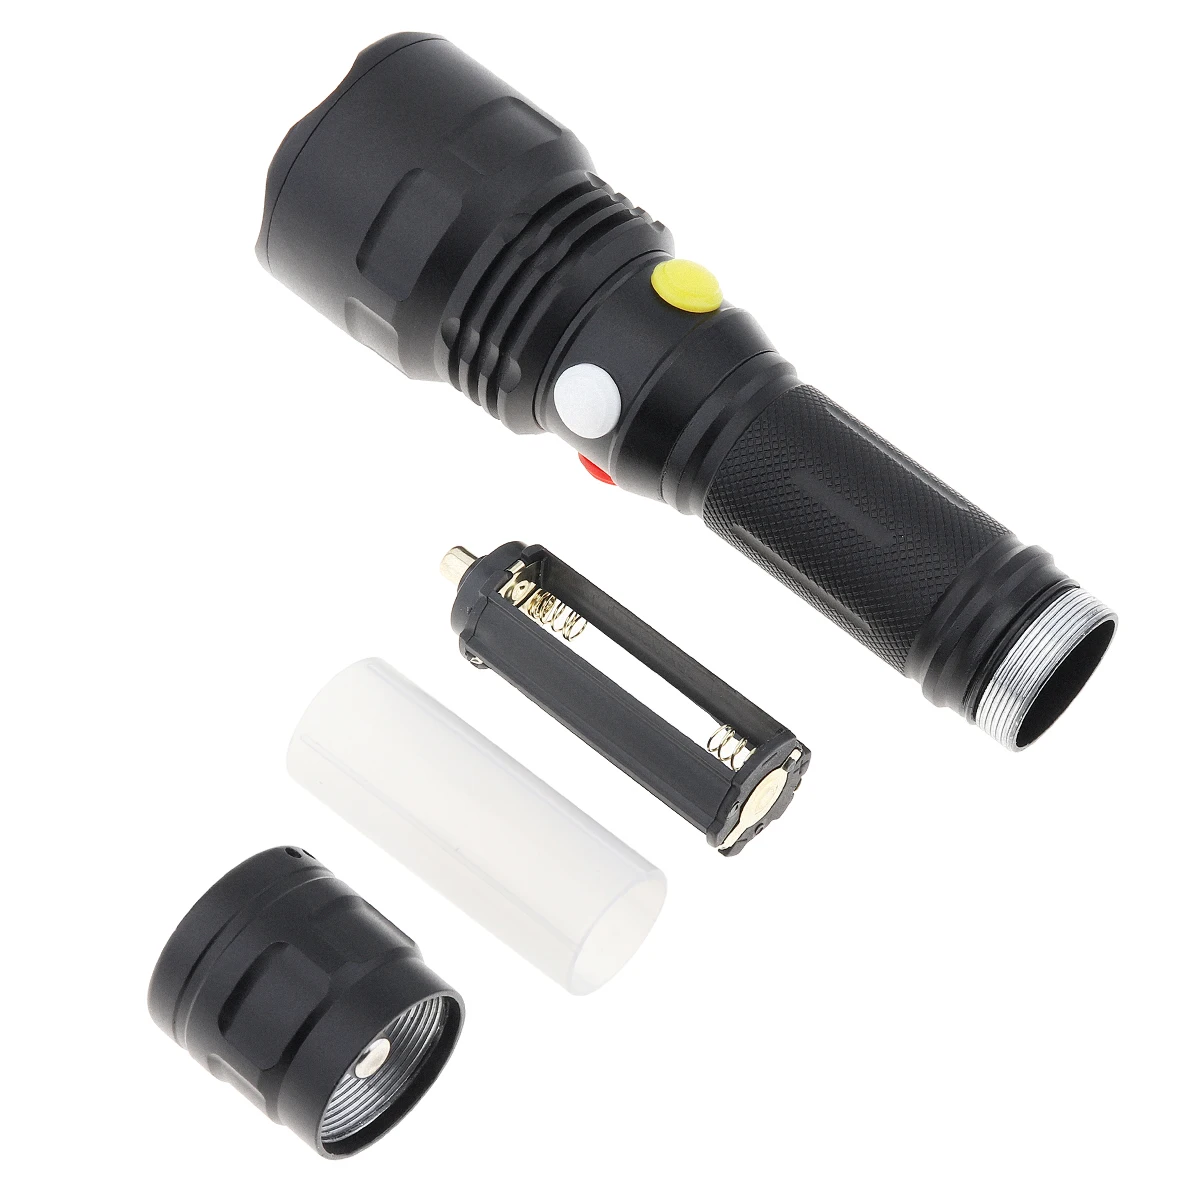 4 Color LED Tactical Flashlight 10W 1200LM White Red Green Yellow led Rechargeable Magnetic Torches Waterproof for Camping